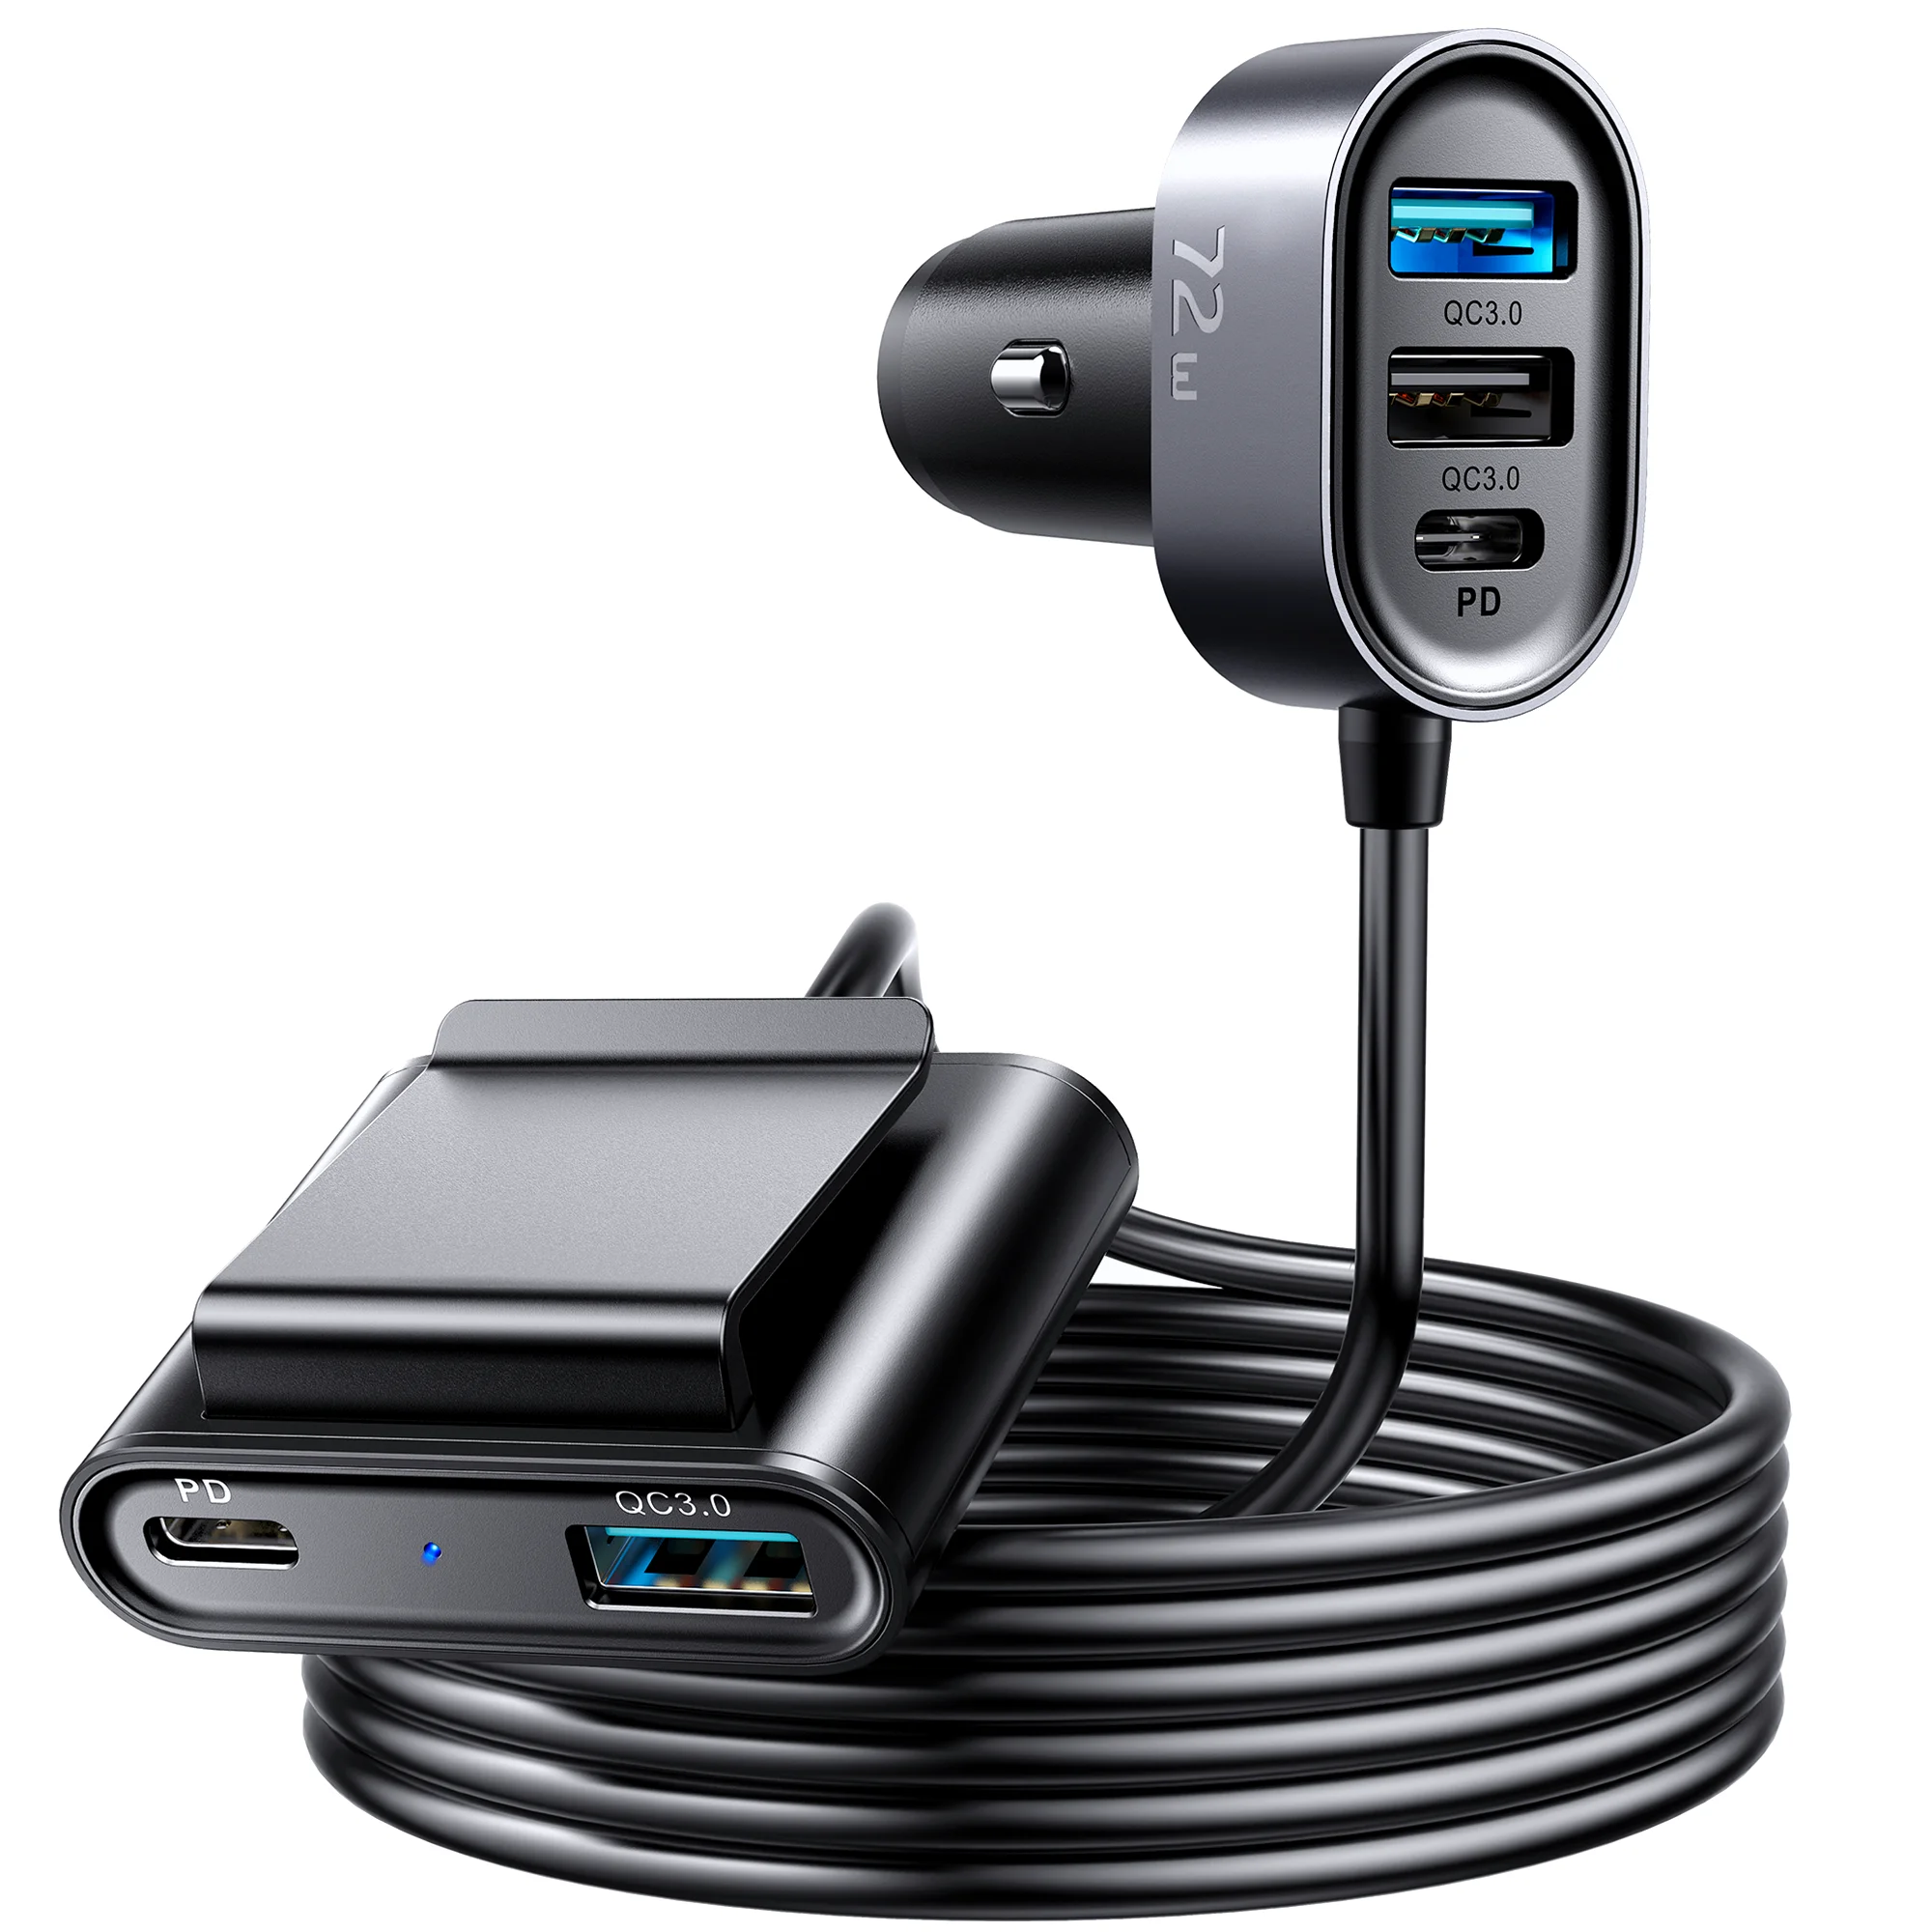 

JOYROOM 2021 New Product Hot 5 Prot 72W Fast PD Charger QC3.0 Travel Charger C Type Wholesale Amazon Top Seller USB Car Charger